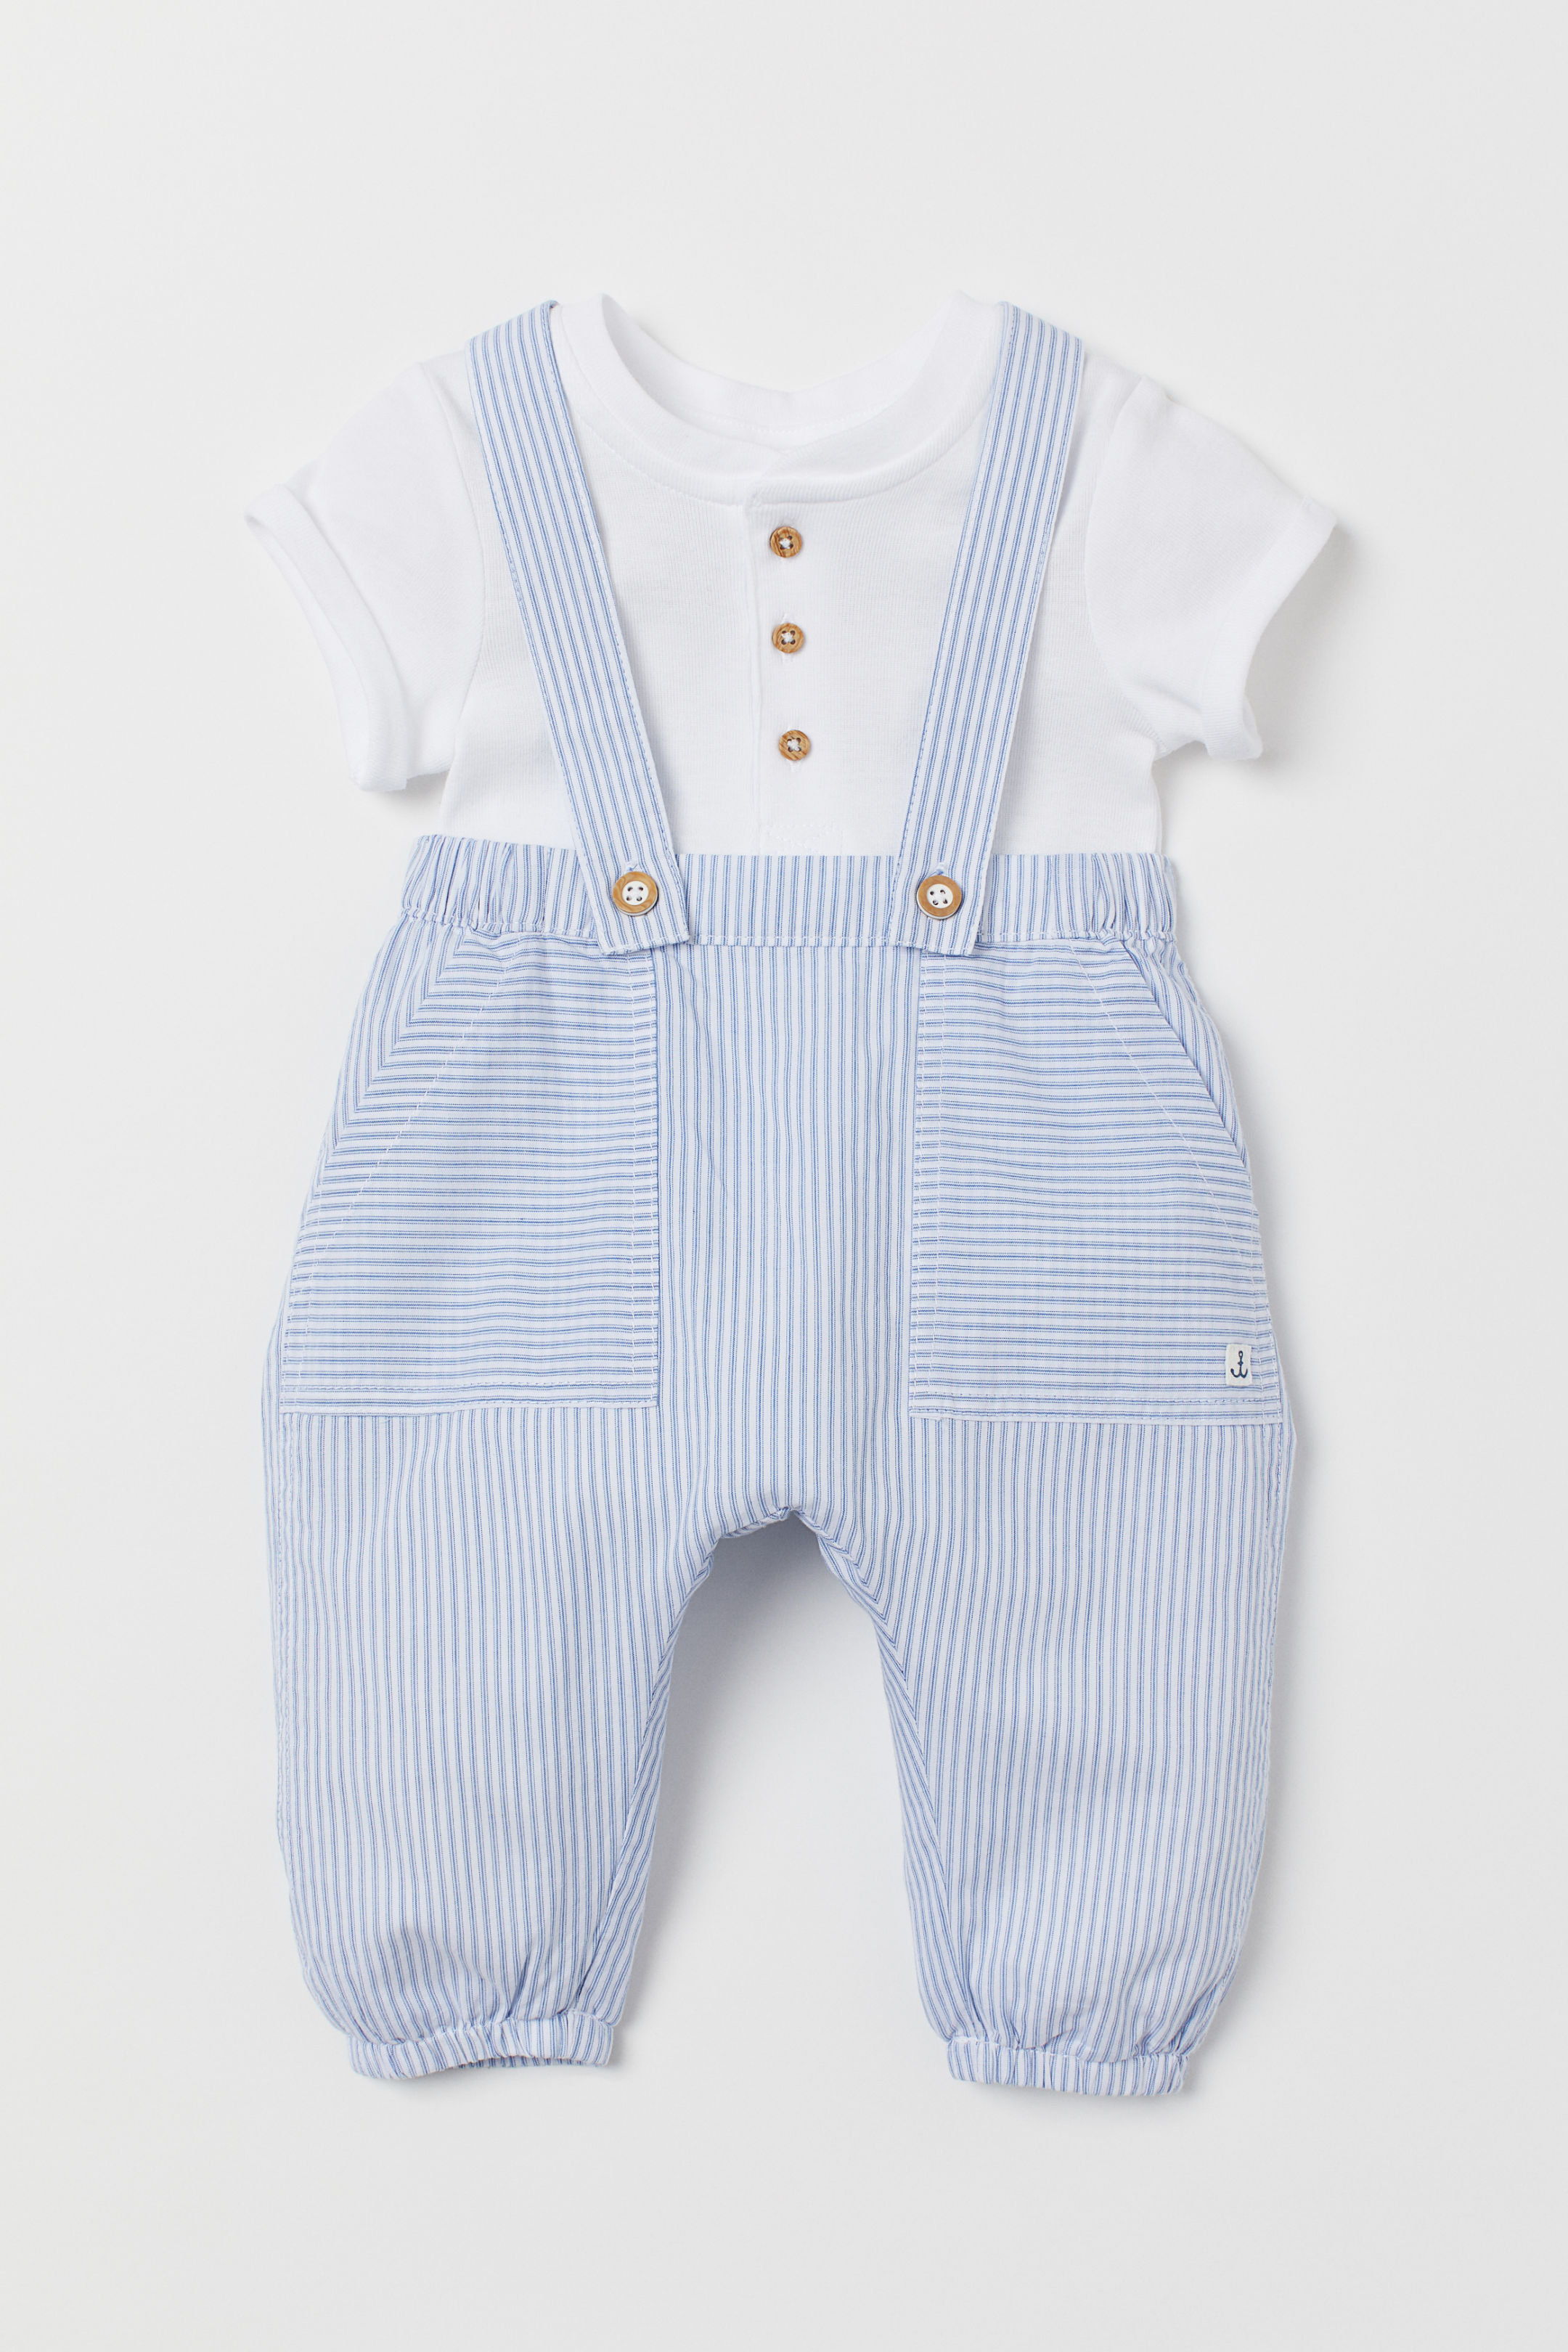 h&m baby clothes uk